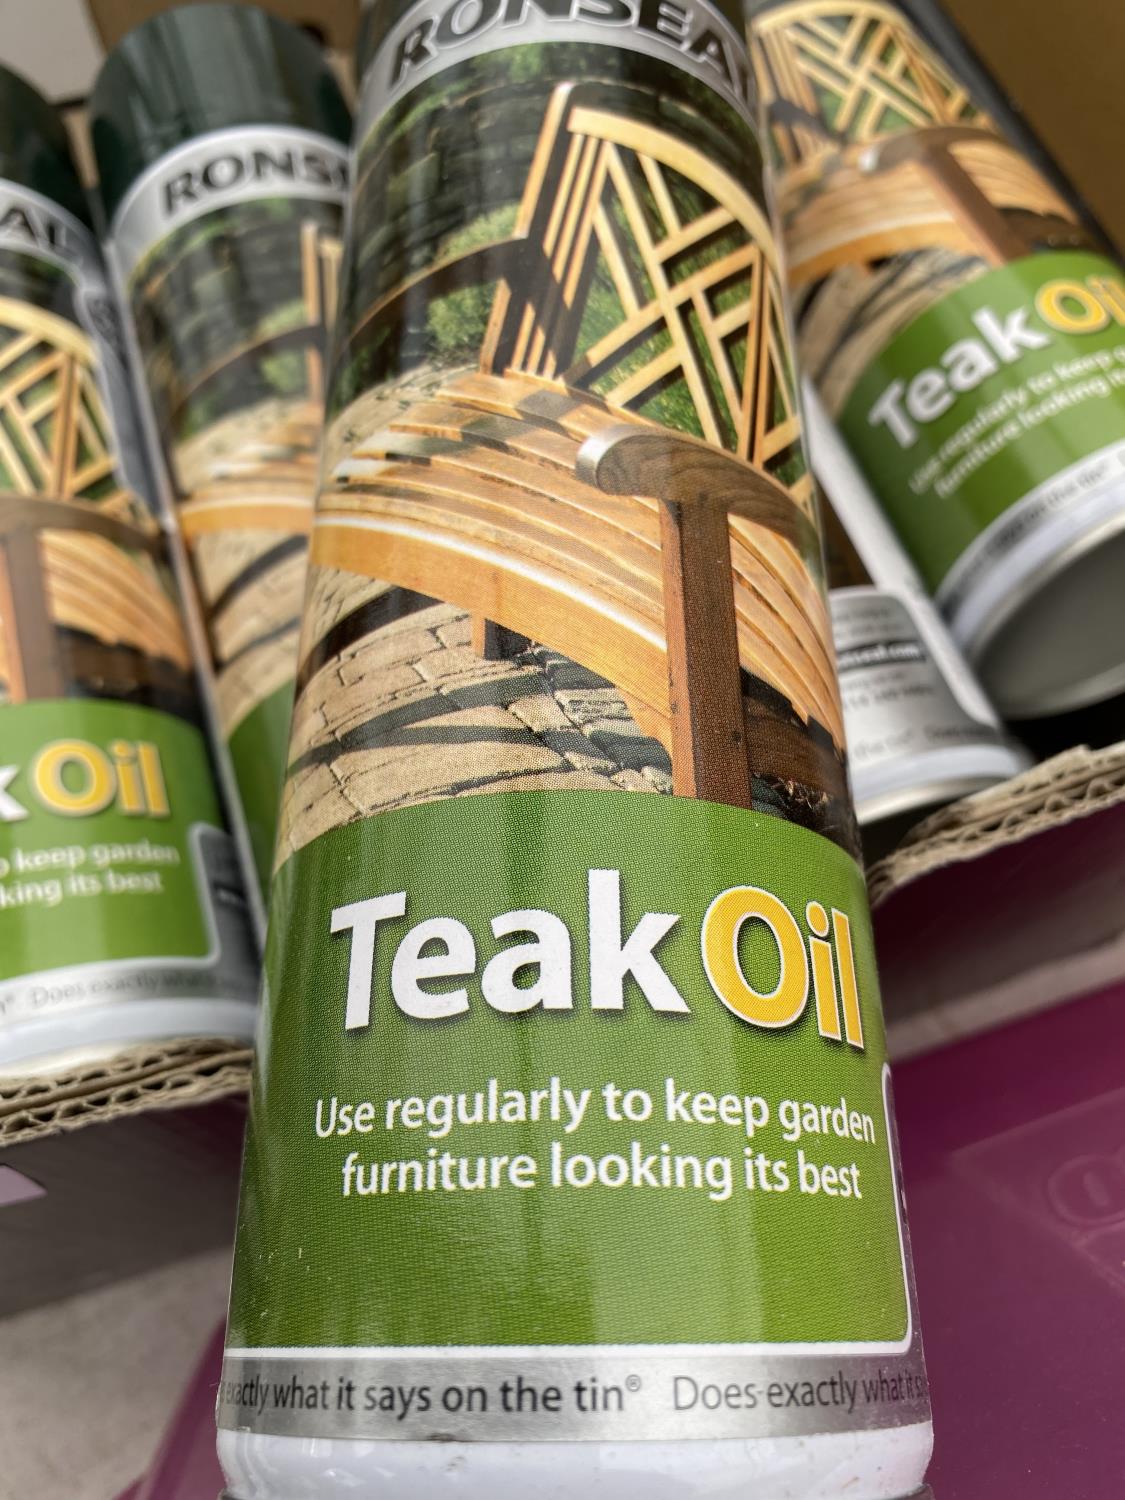 A COLLECTION OF TEN SPRAY CANS OF RONSEAL TEAK OIL - Image 2 of 2